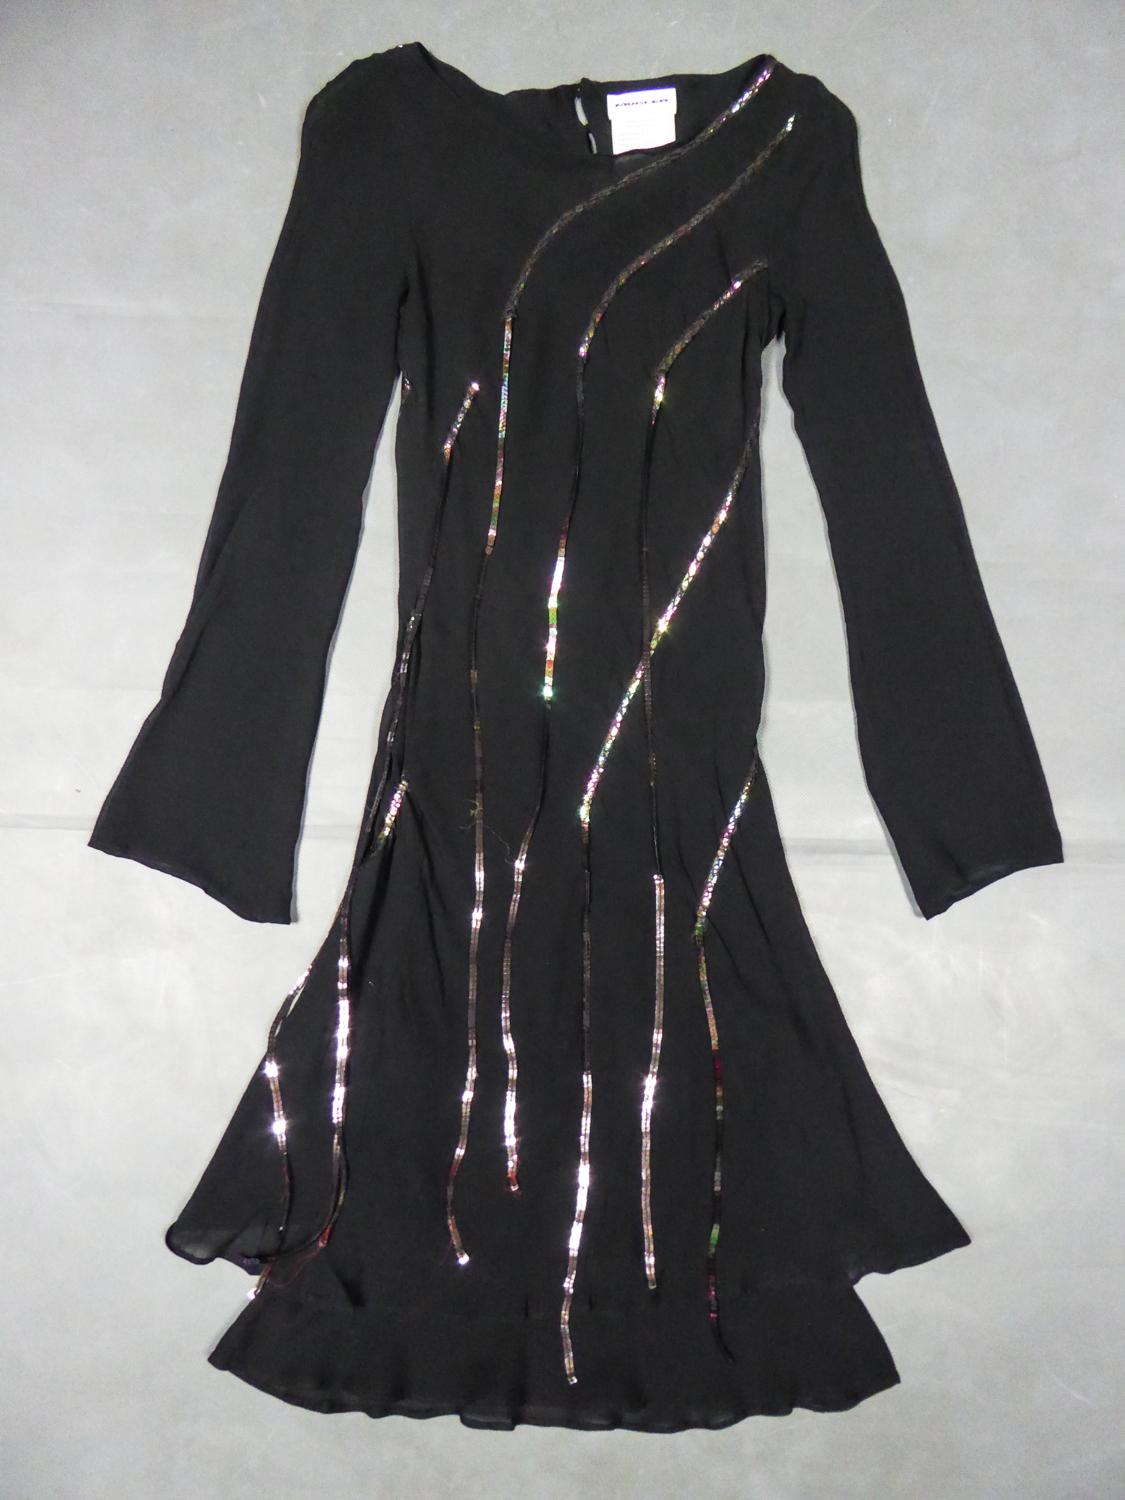 Circa 2000
France

Little Black Cocktail Dress in black silk crepe decorated with long iridescent sequined fringes by Thierry Mugler and dating from the 2000s. Short dress with round collar and long sleeves widened at the wrists. Appliqué fringes of